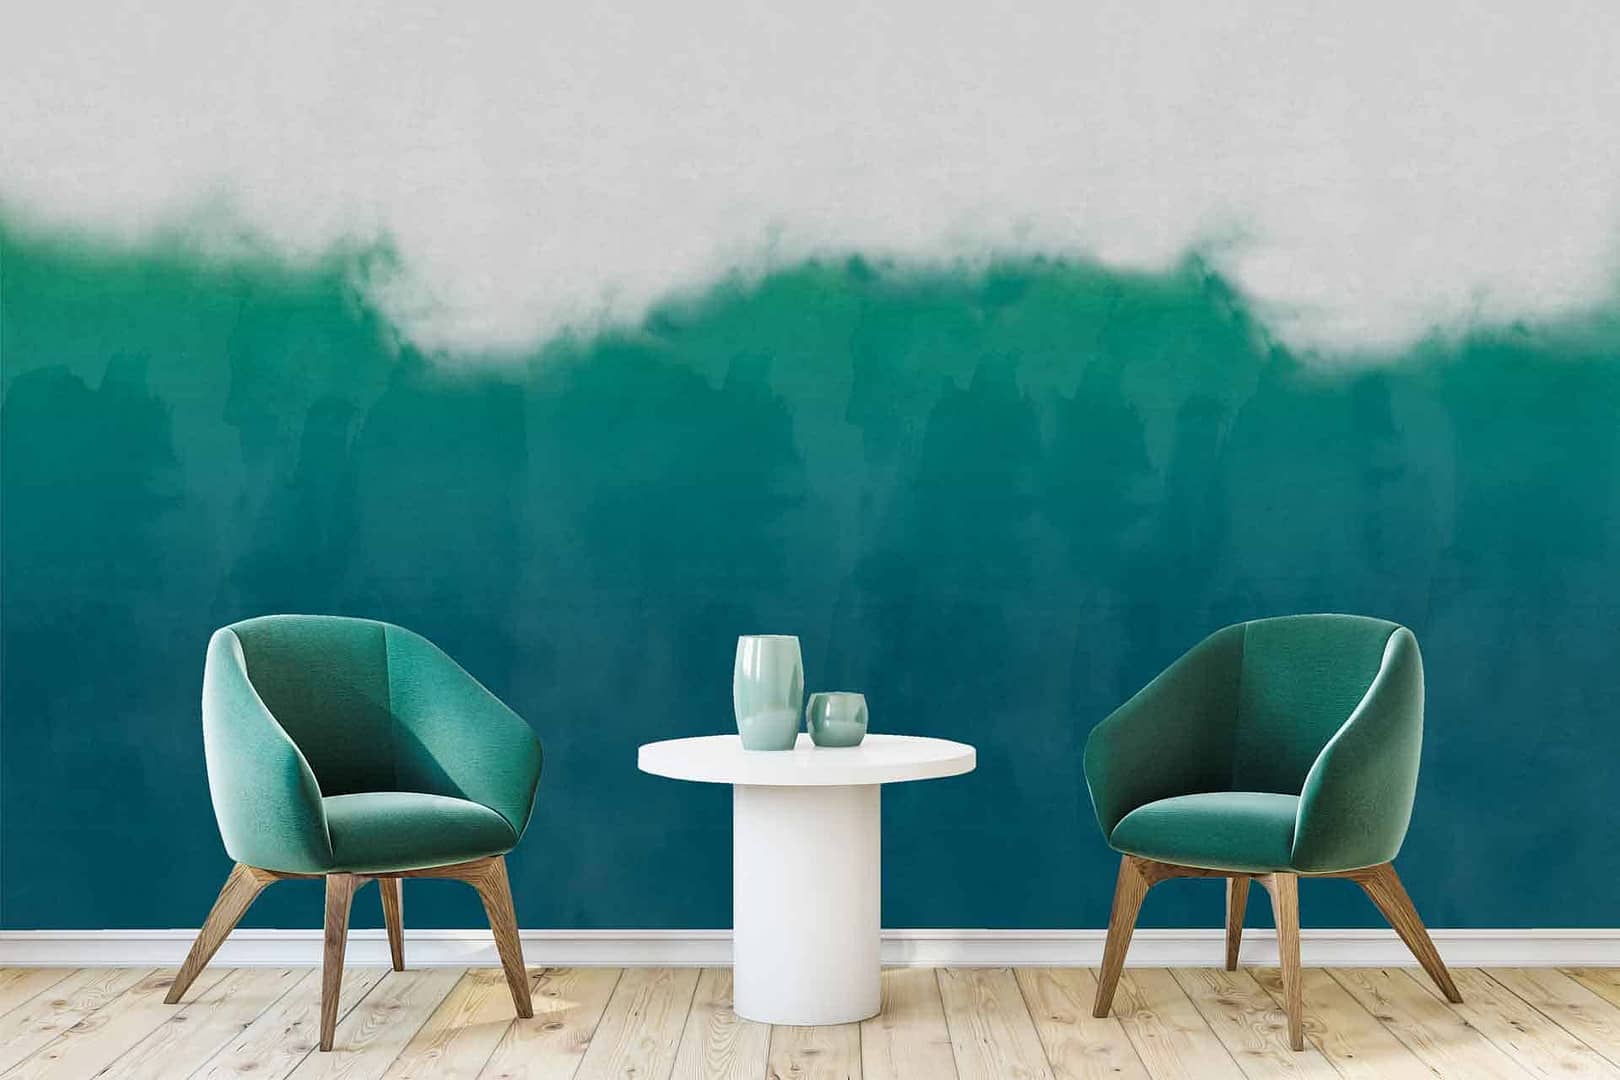 Be Brave - a wallpaper under art effects, a painted wall in blues and greens with white at the top by Cara Saven Wall Design